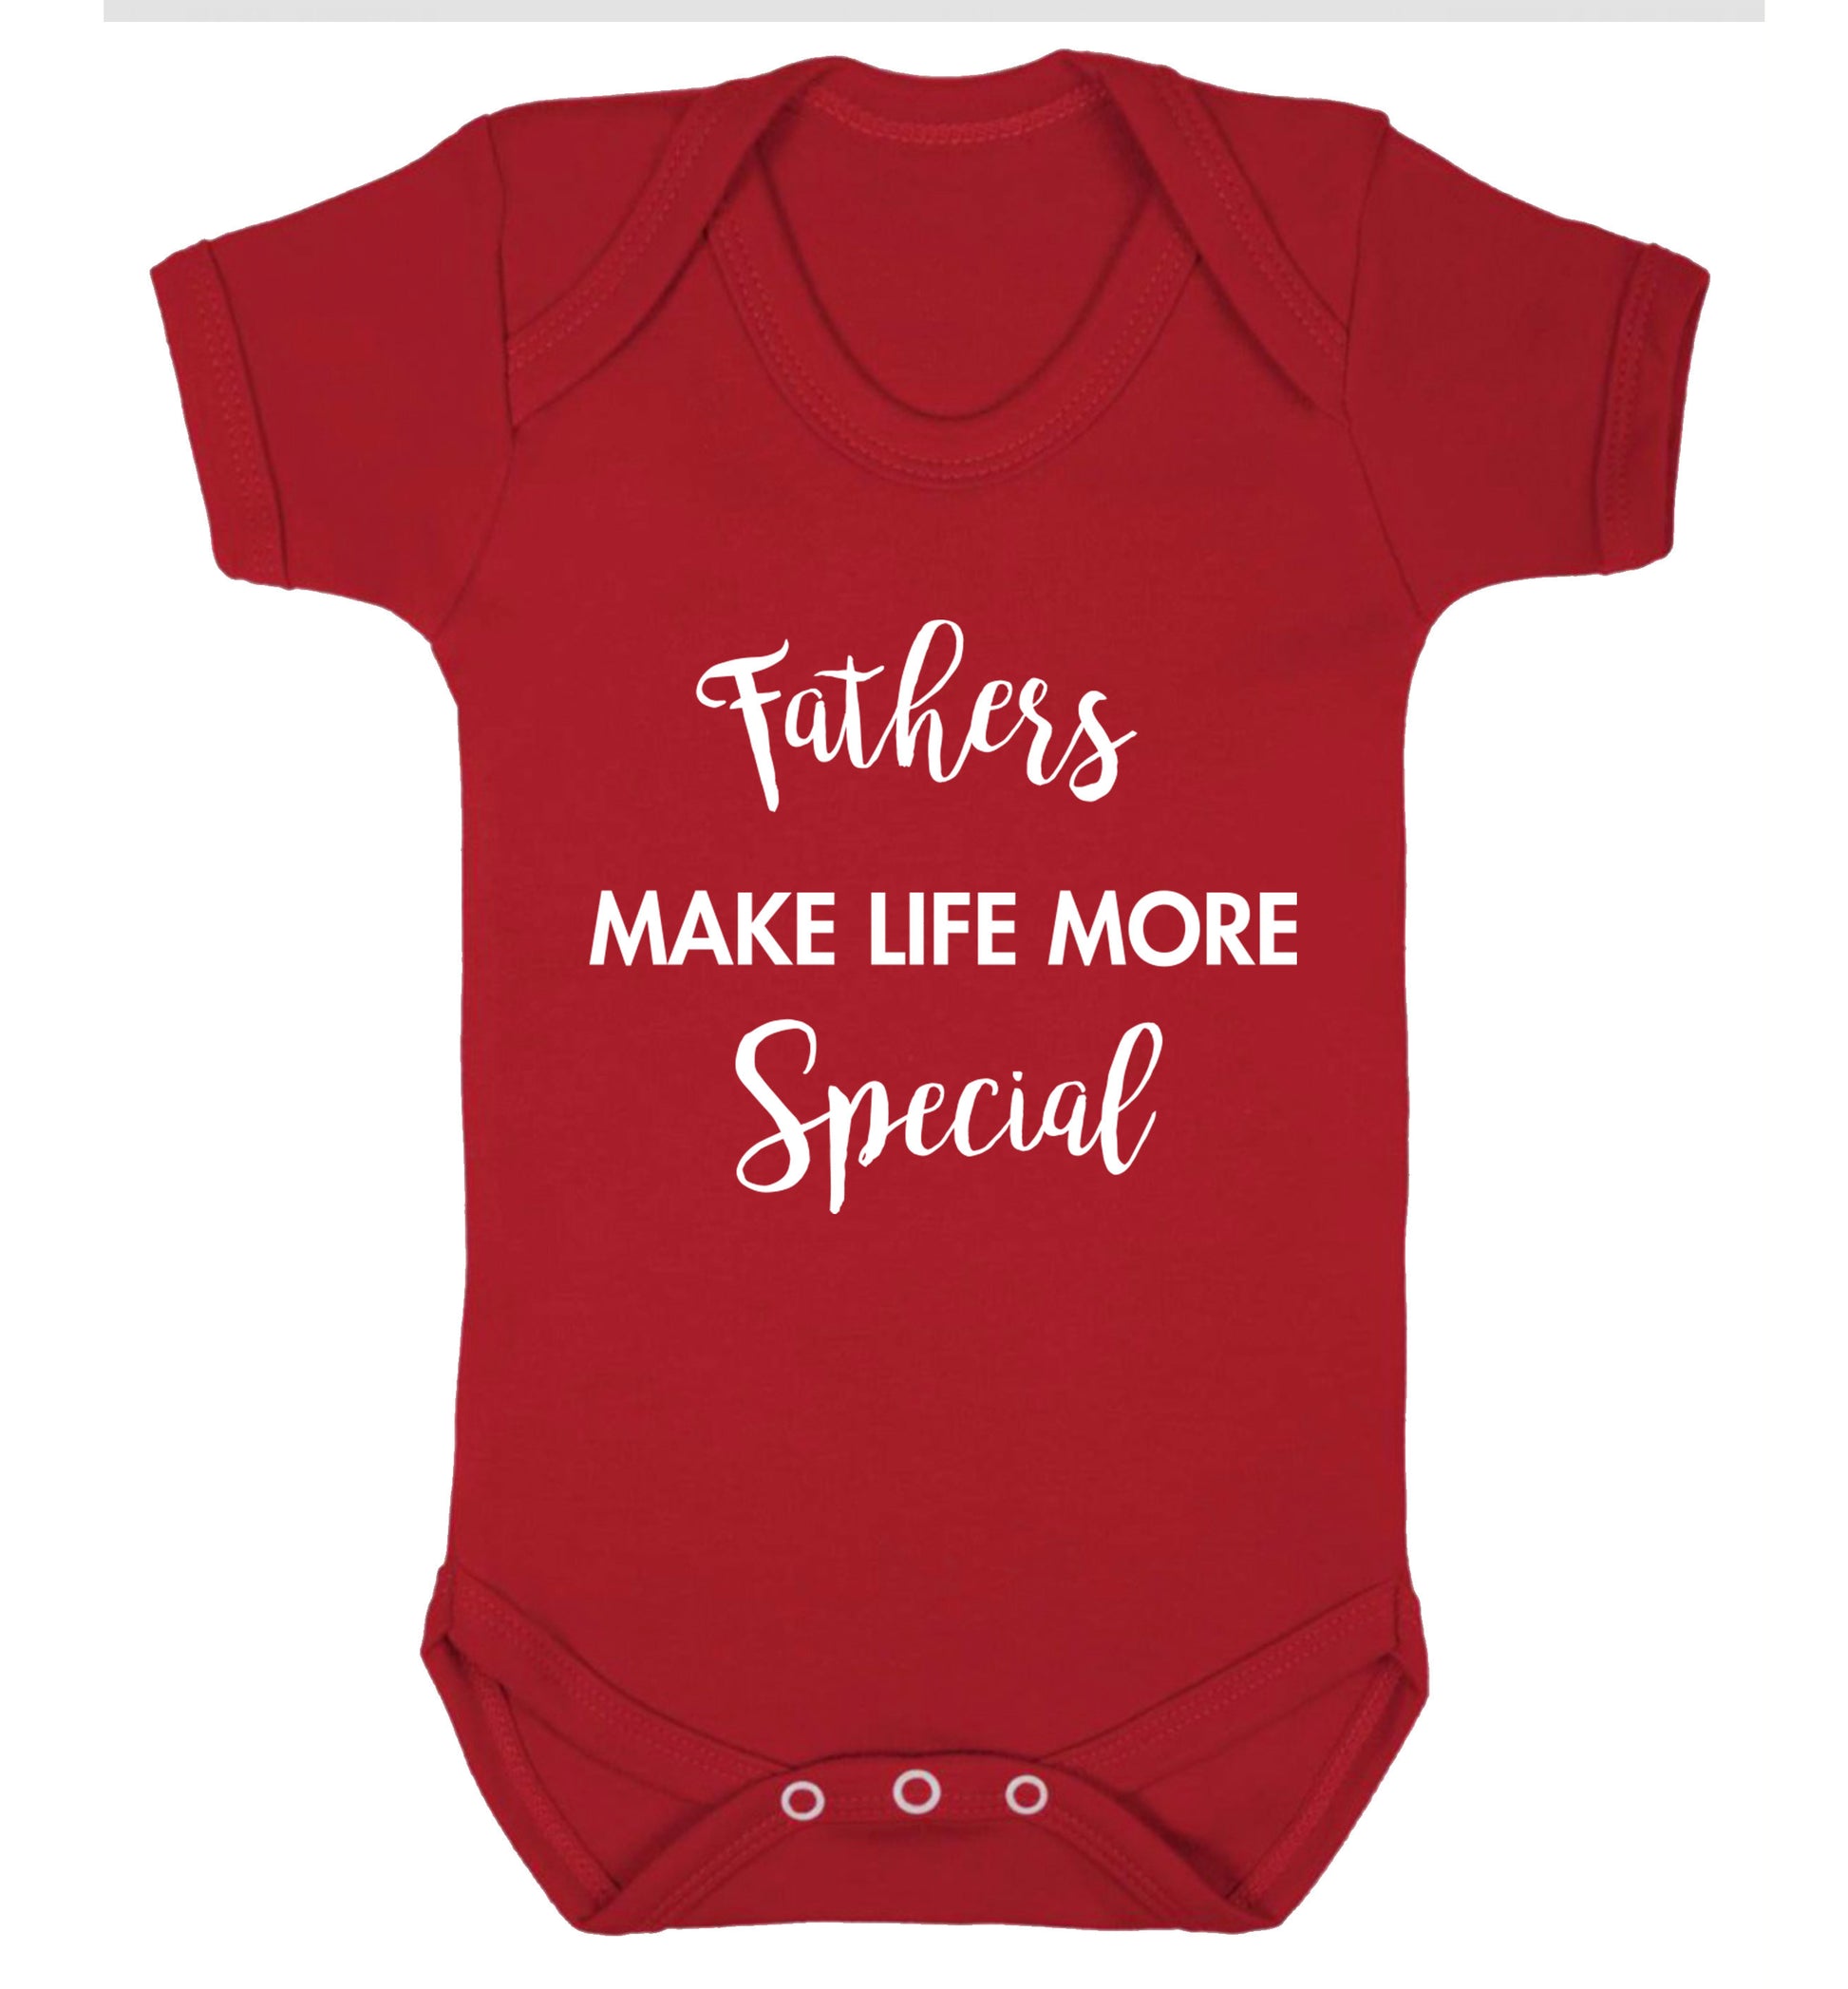 Fathers make life more special Baby Vest red 18-24 months